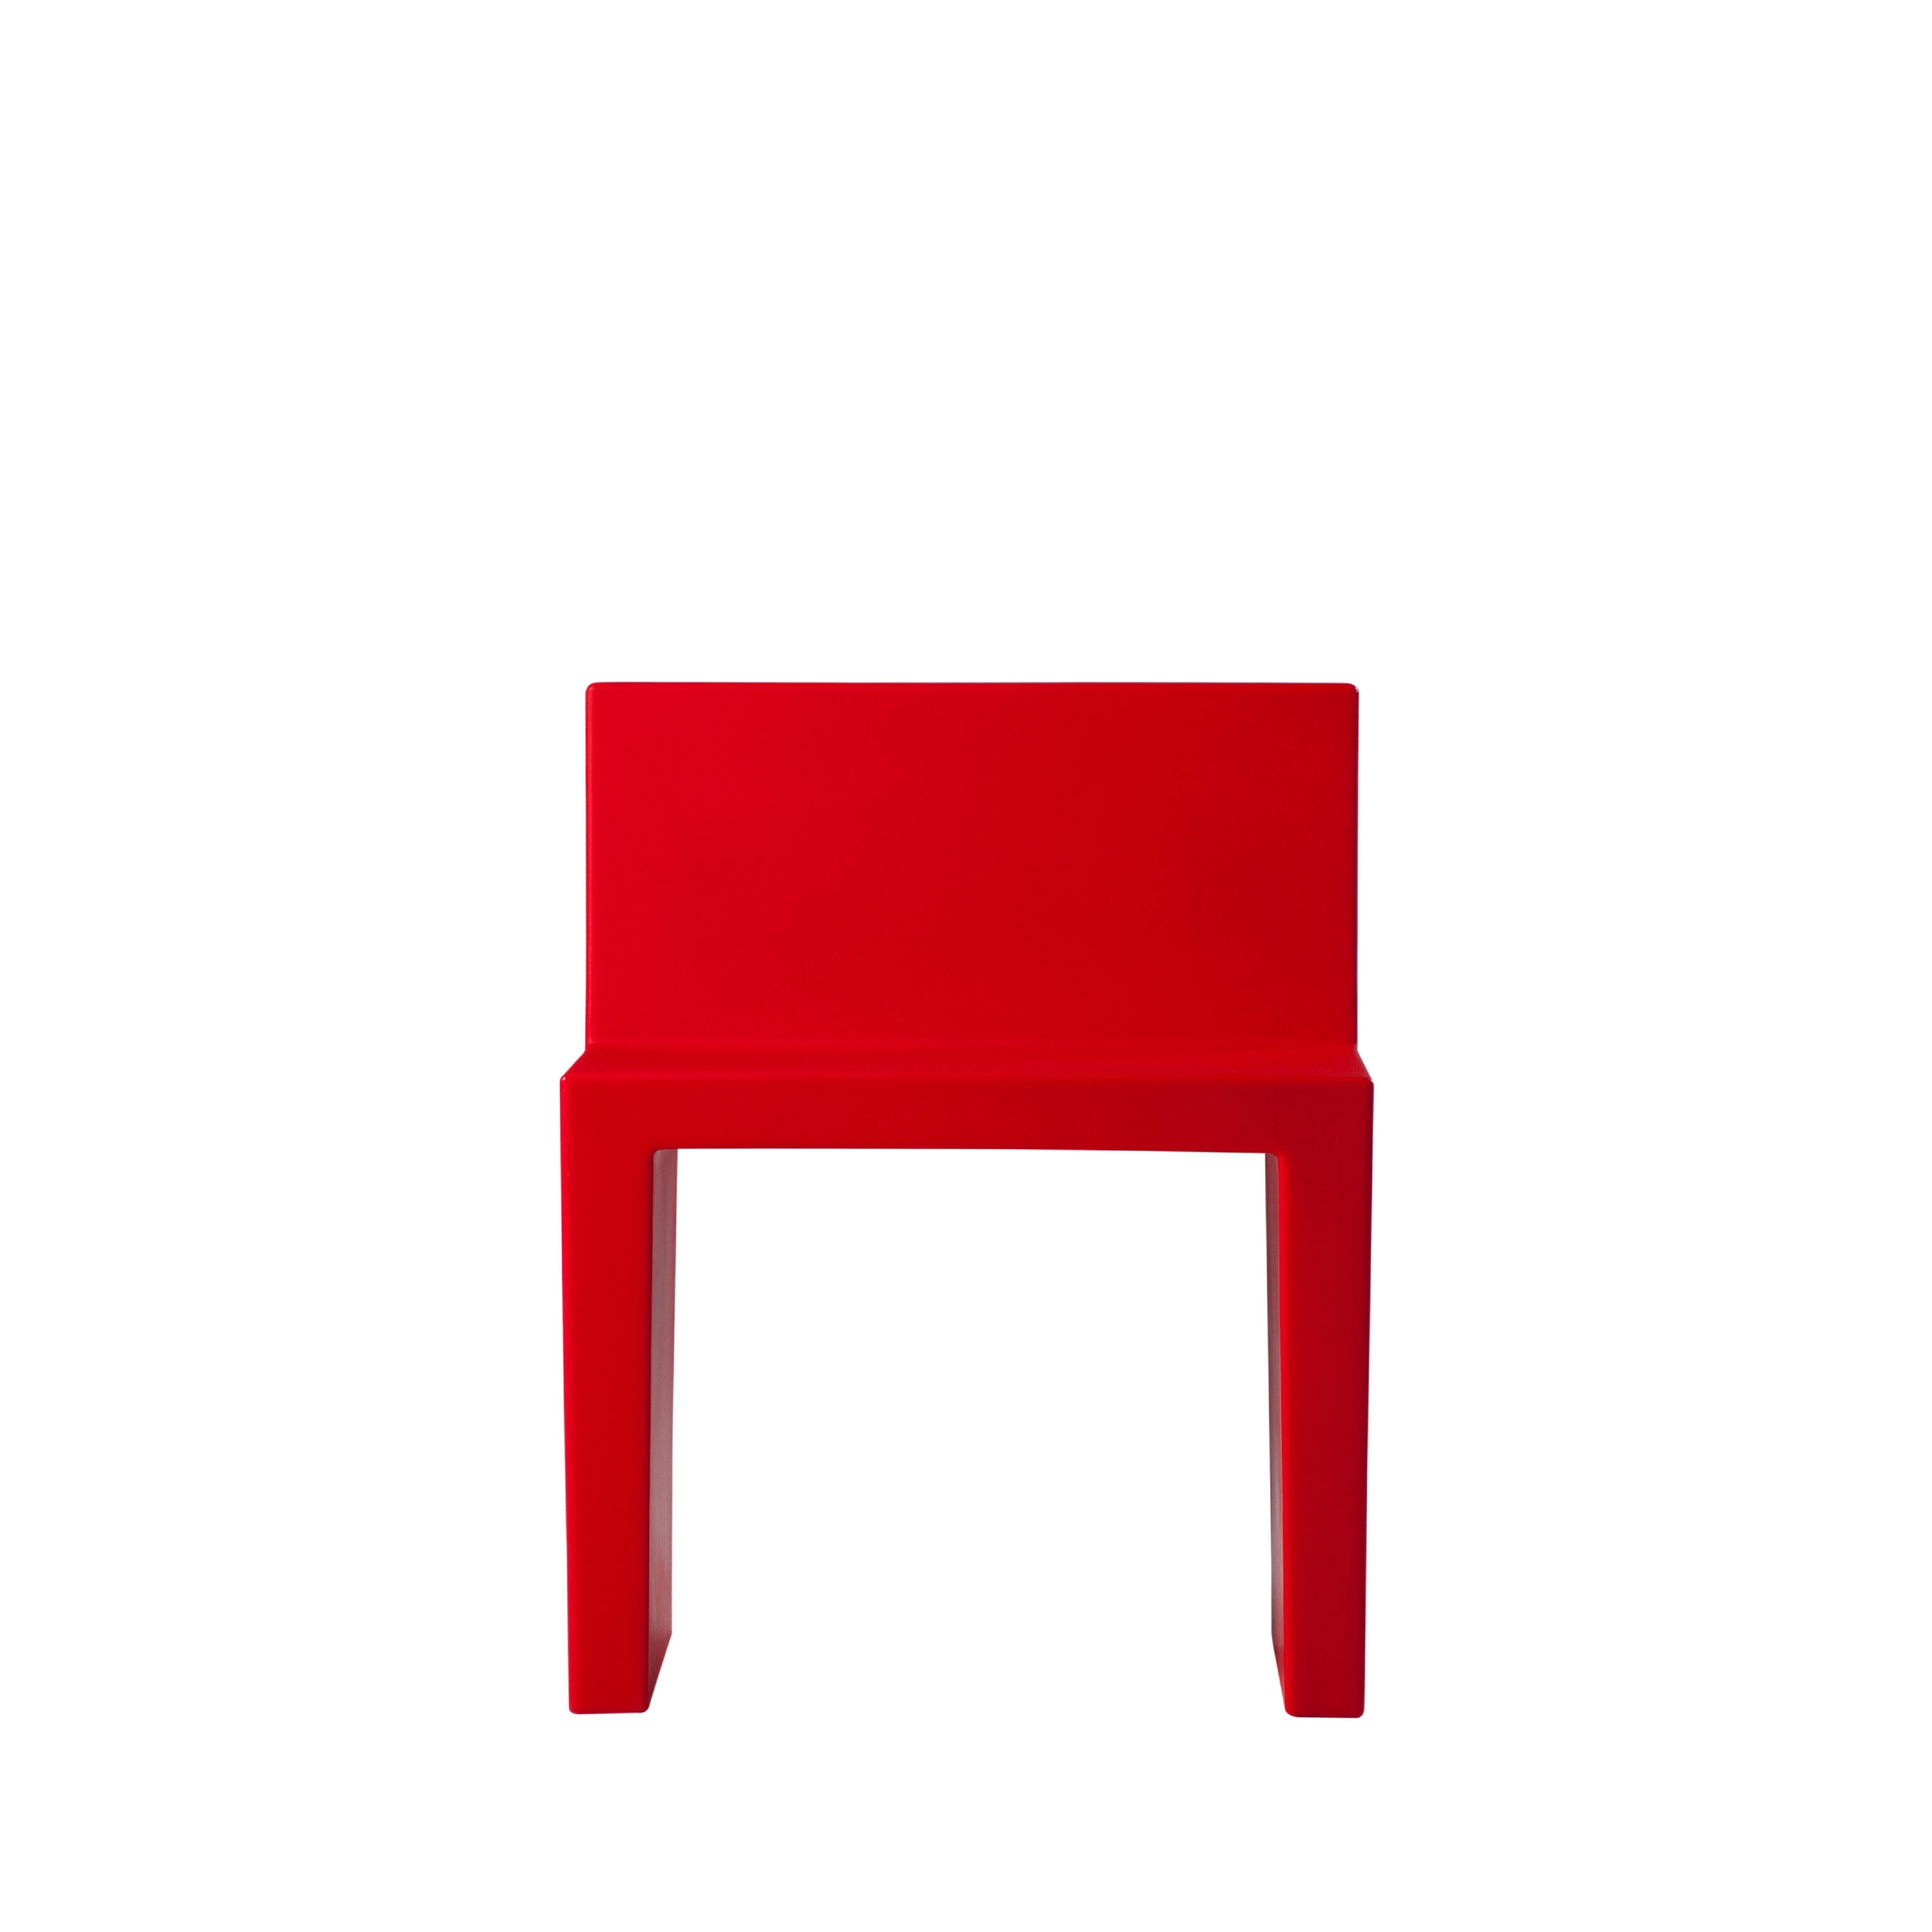 Italian Slide Design Angolo Retto Kids Chair in Flame Red by Slide Studio For Sale